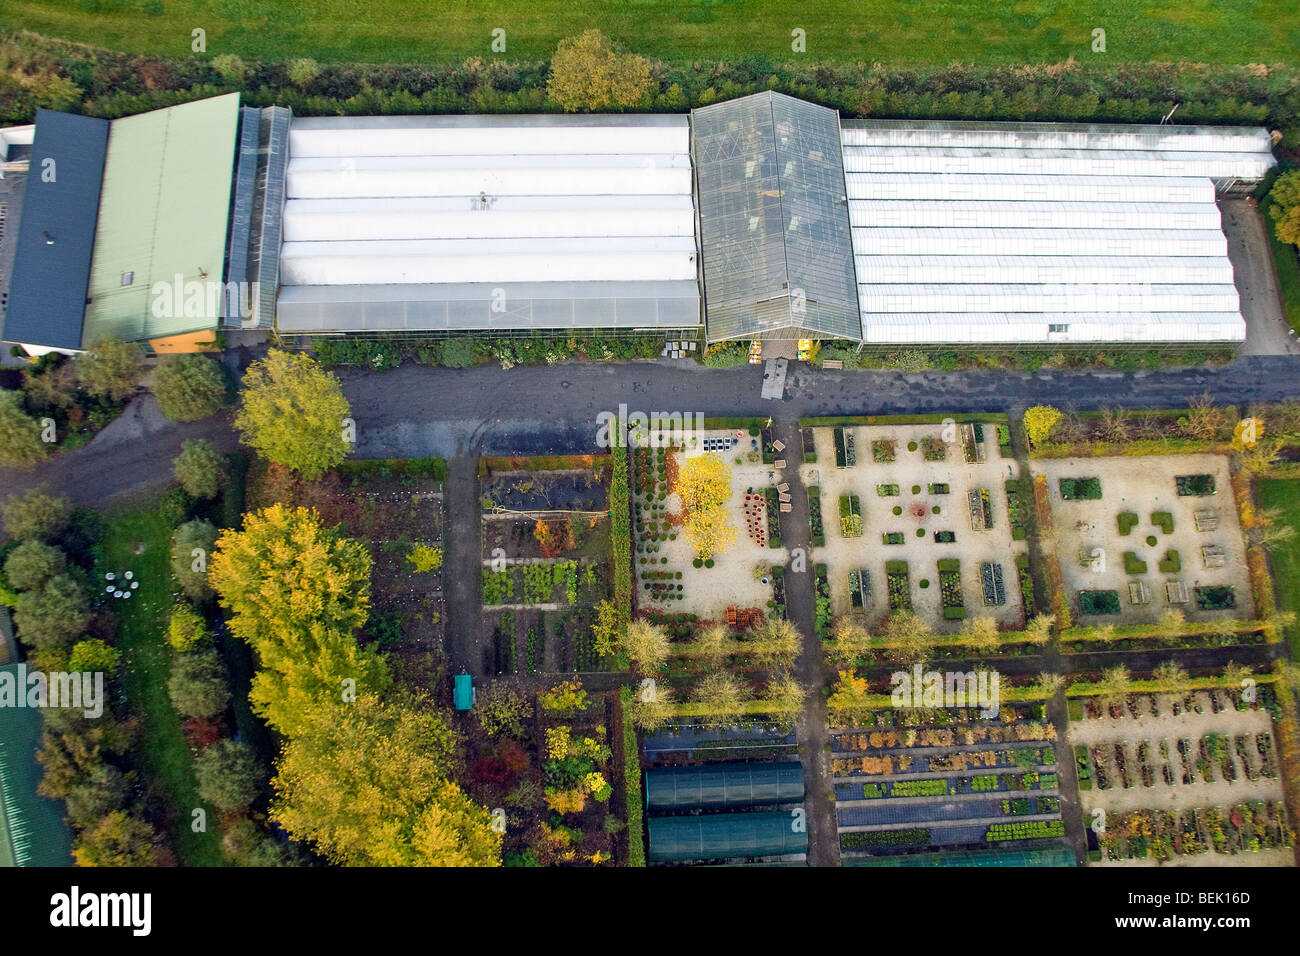 Florist's business with greenhouses for ornamental plants and shrubbery, Belgium Stock Photo